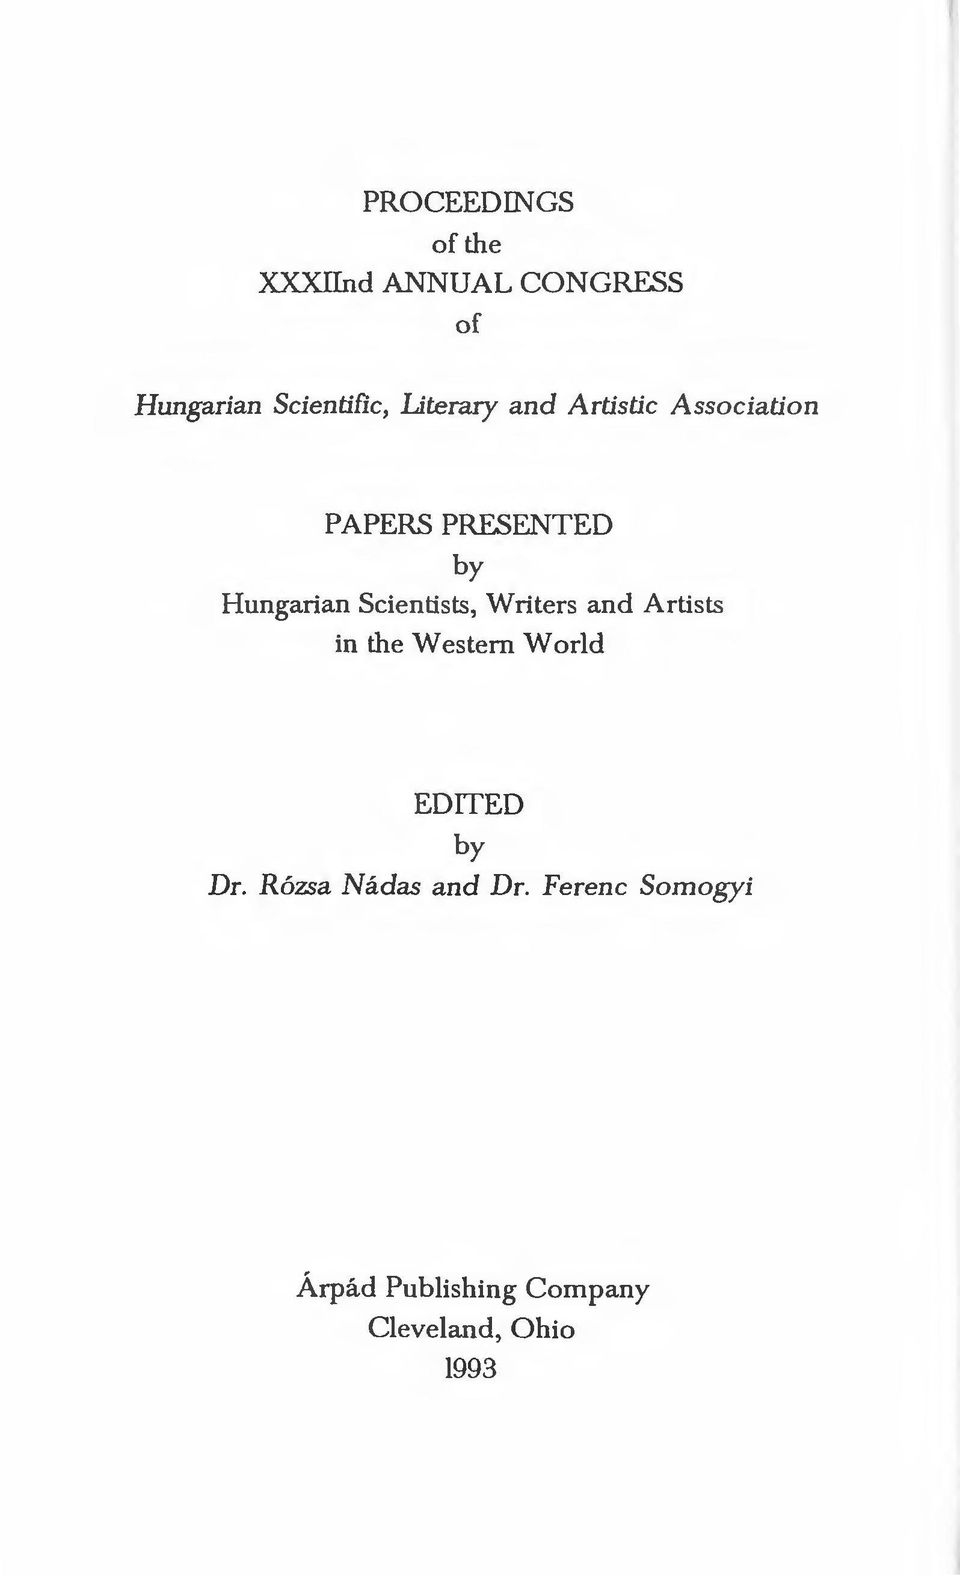 Scientists, Writers and Artists in the W estem World EDITED by Dr.